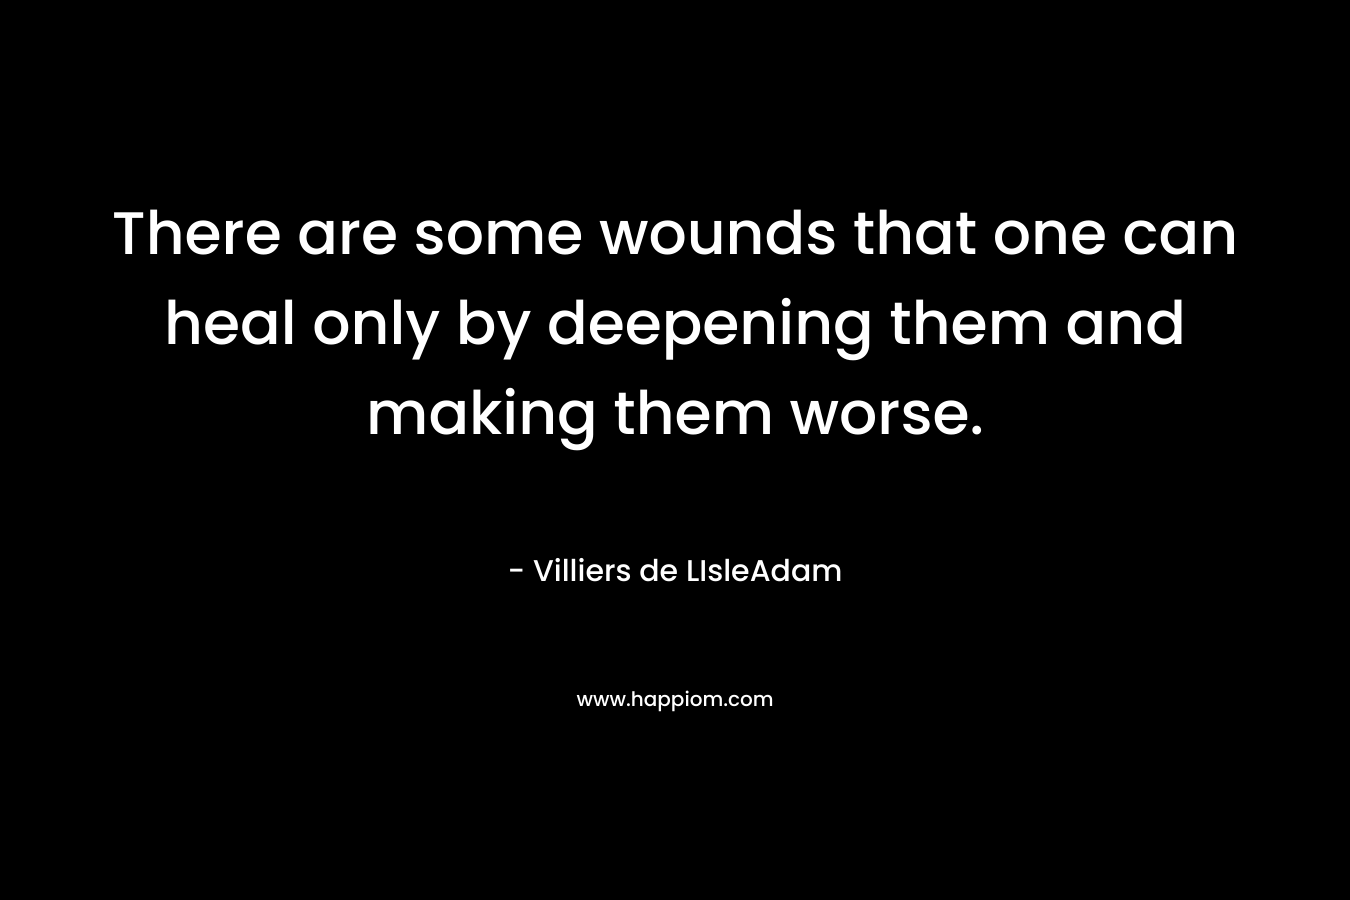 There are some wounds that one can heal only by deepening them and making them worse.